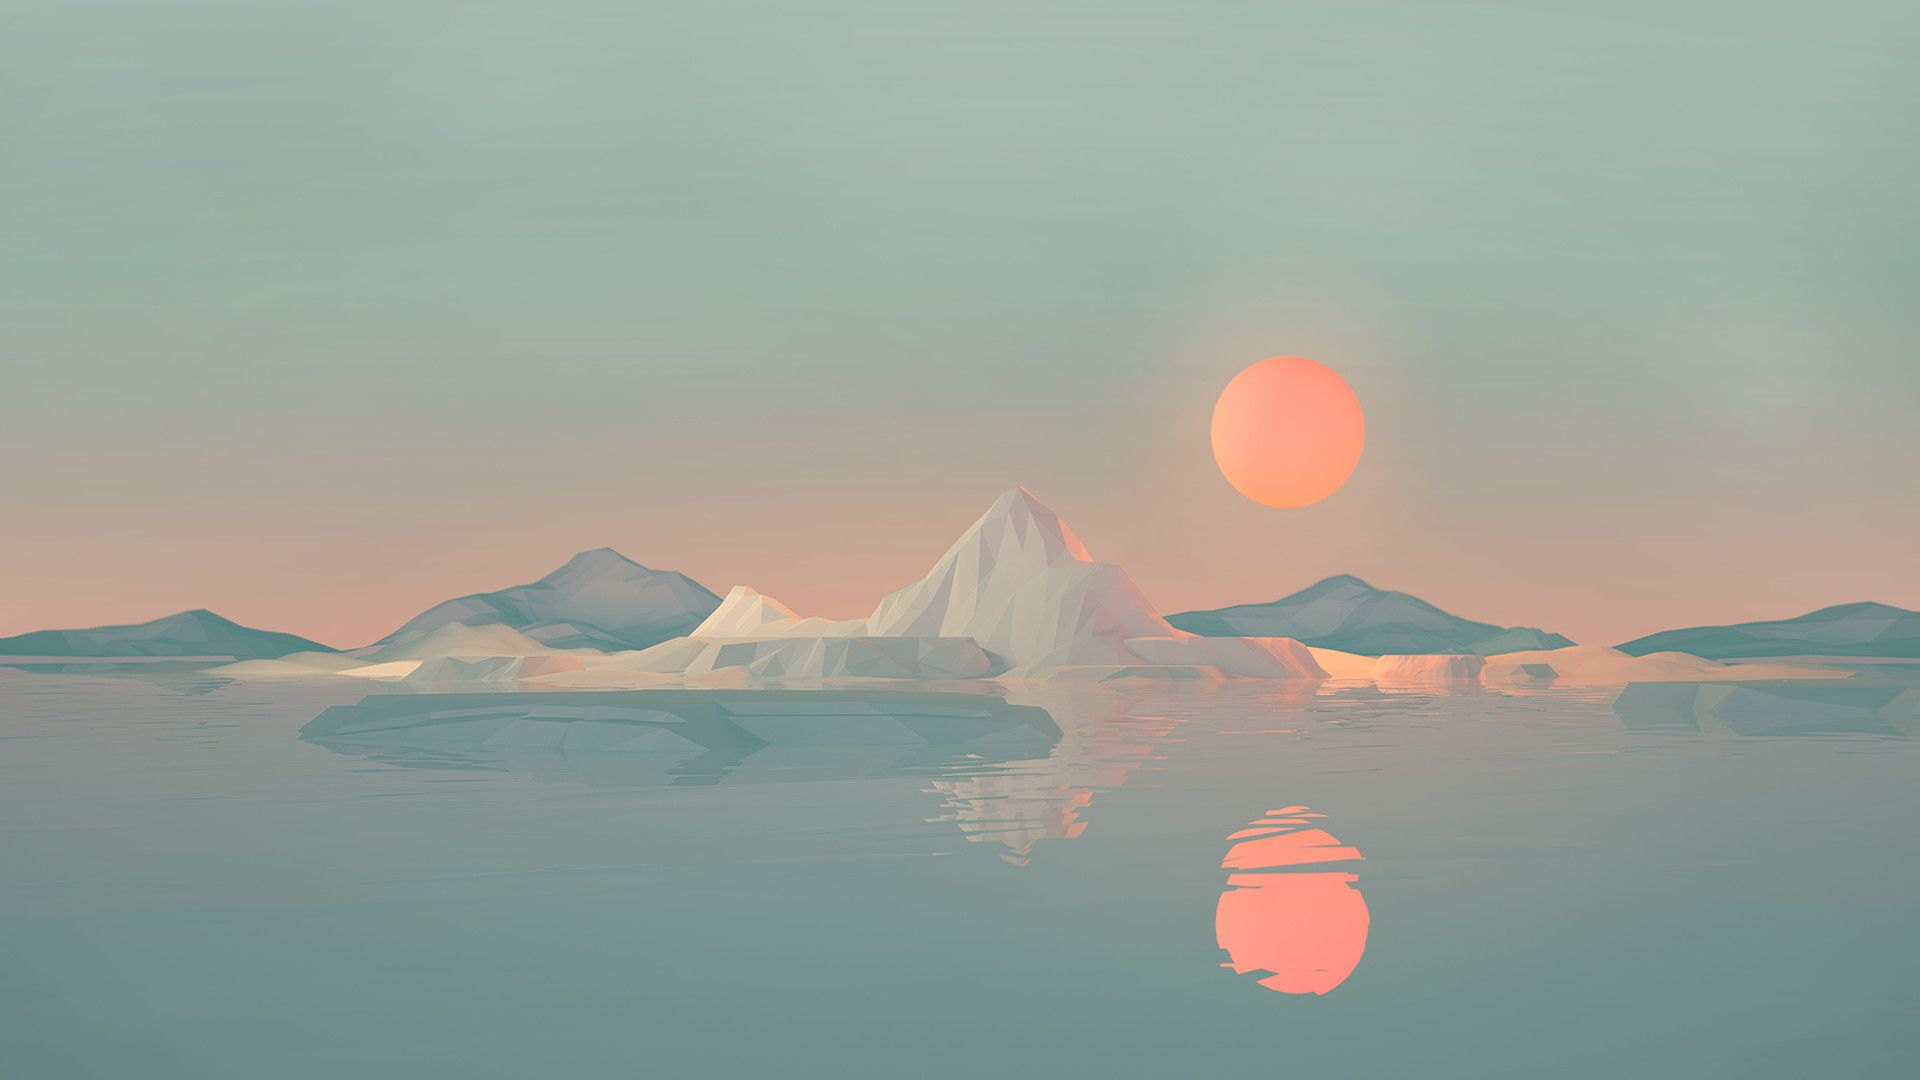 A sunset over an iceberg in the ocean - Low poly